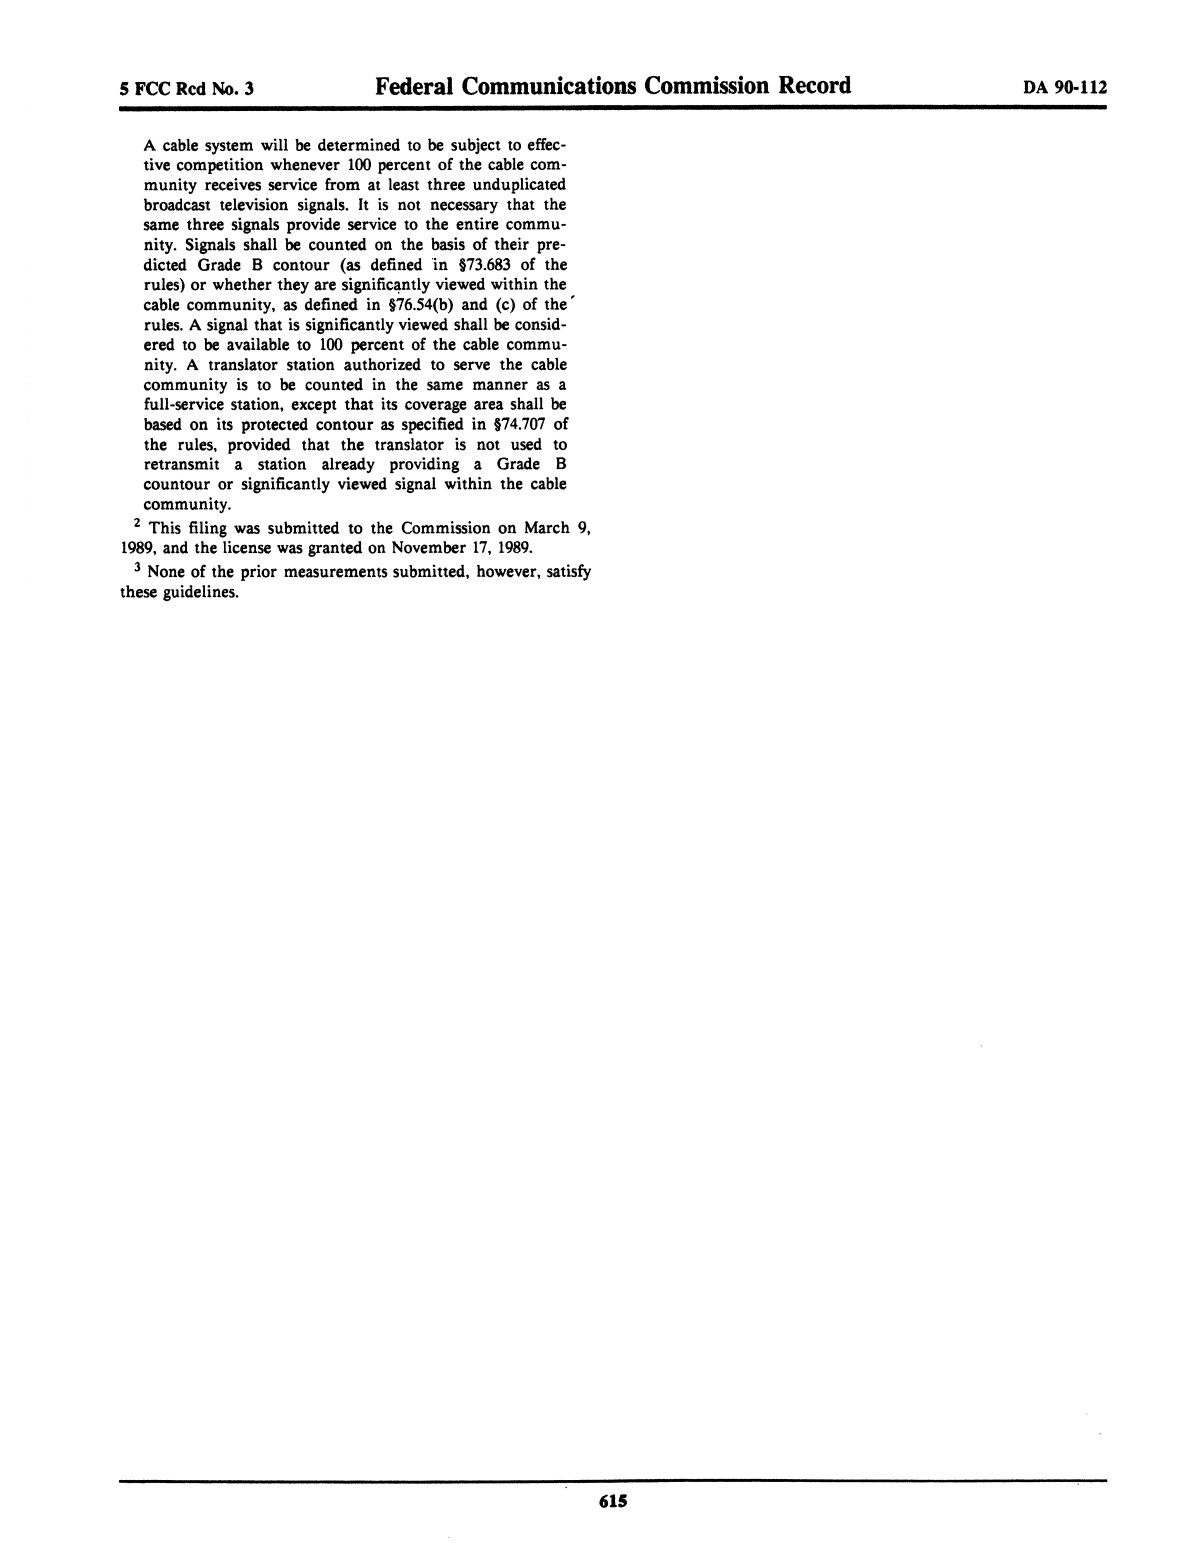 FCC Record, Volume 5, No. 3, Pages 556 to 796, January 29 - February 9, 1990
                                                
                                                    615
                                                